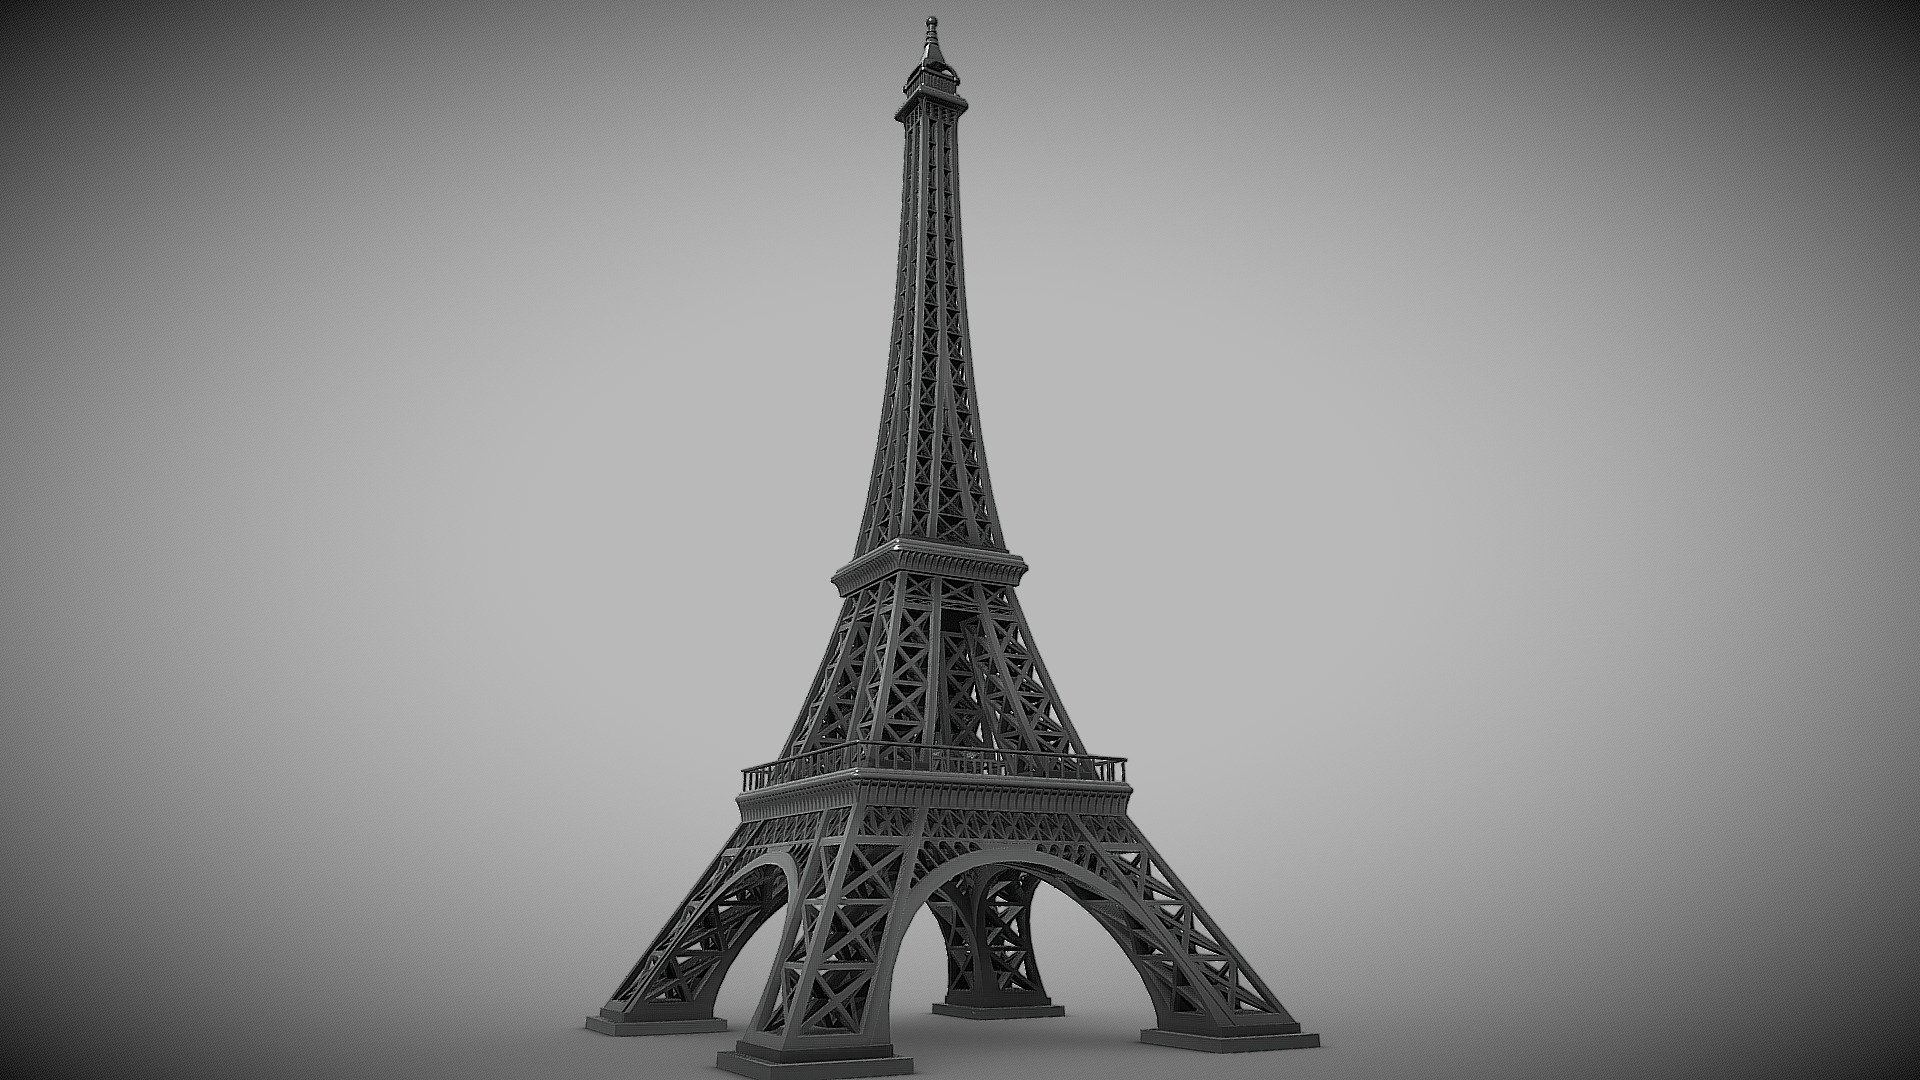 La tour Eiffel - Blender 2.9 - Free download 

The Eiffel Tower is a puddled iron tower 324 meters high located in Paris, at the north-western end of the Champ-de-Mars park on the banks of the Seine in the 7th arrondissement. Its official address is 5, avenue Anatole-France.

the model is ready for 3D printing 3d model